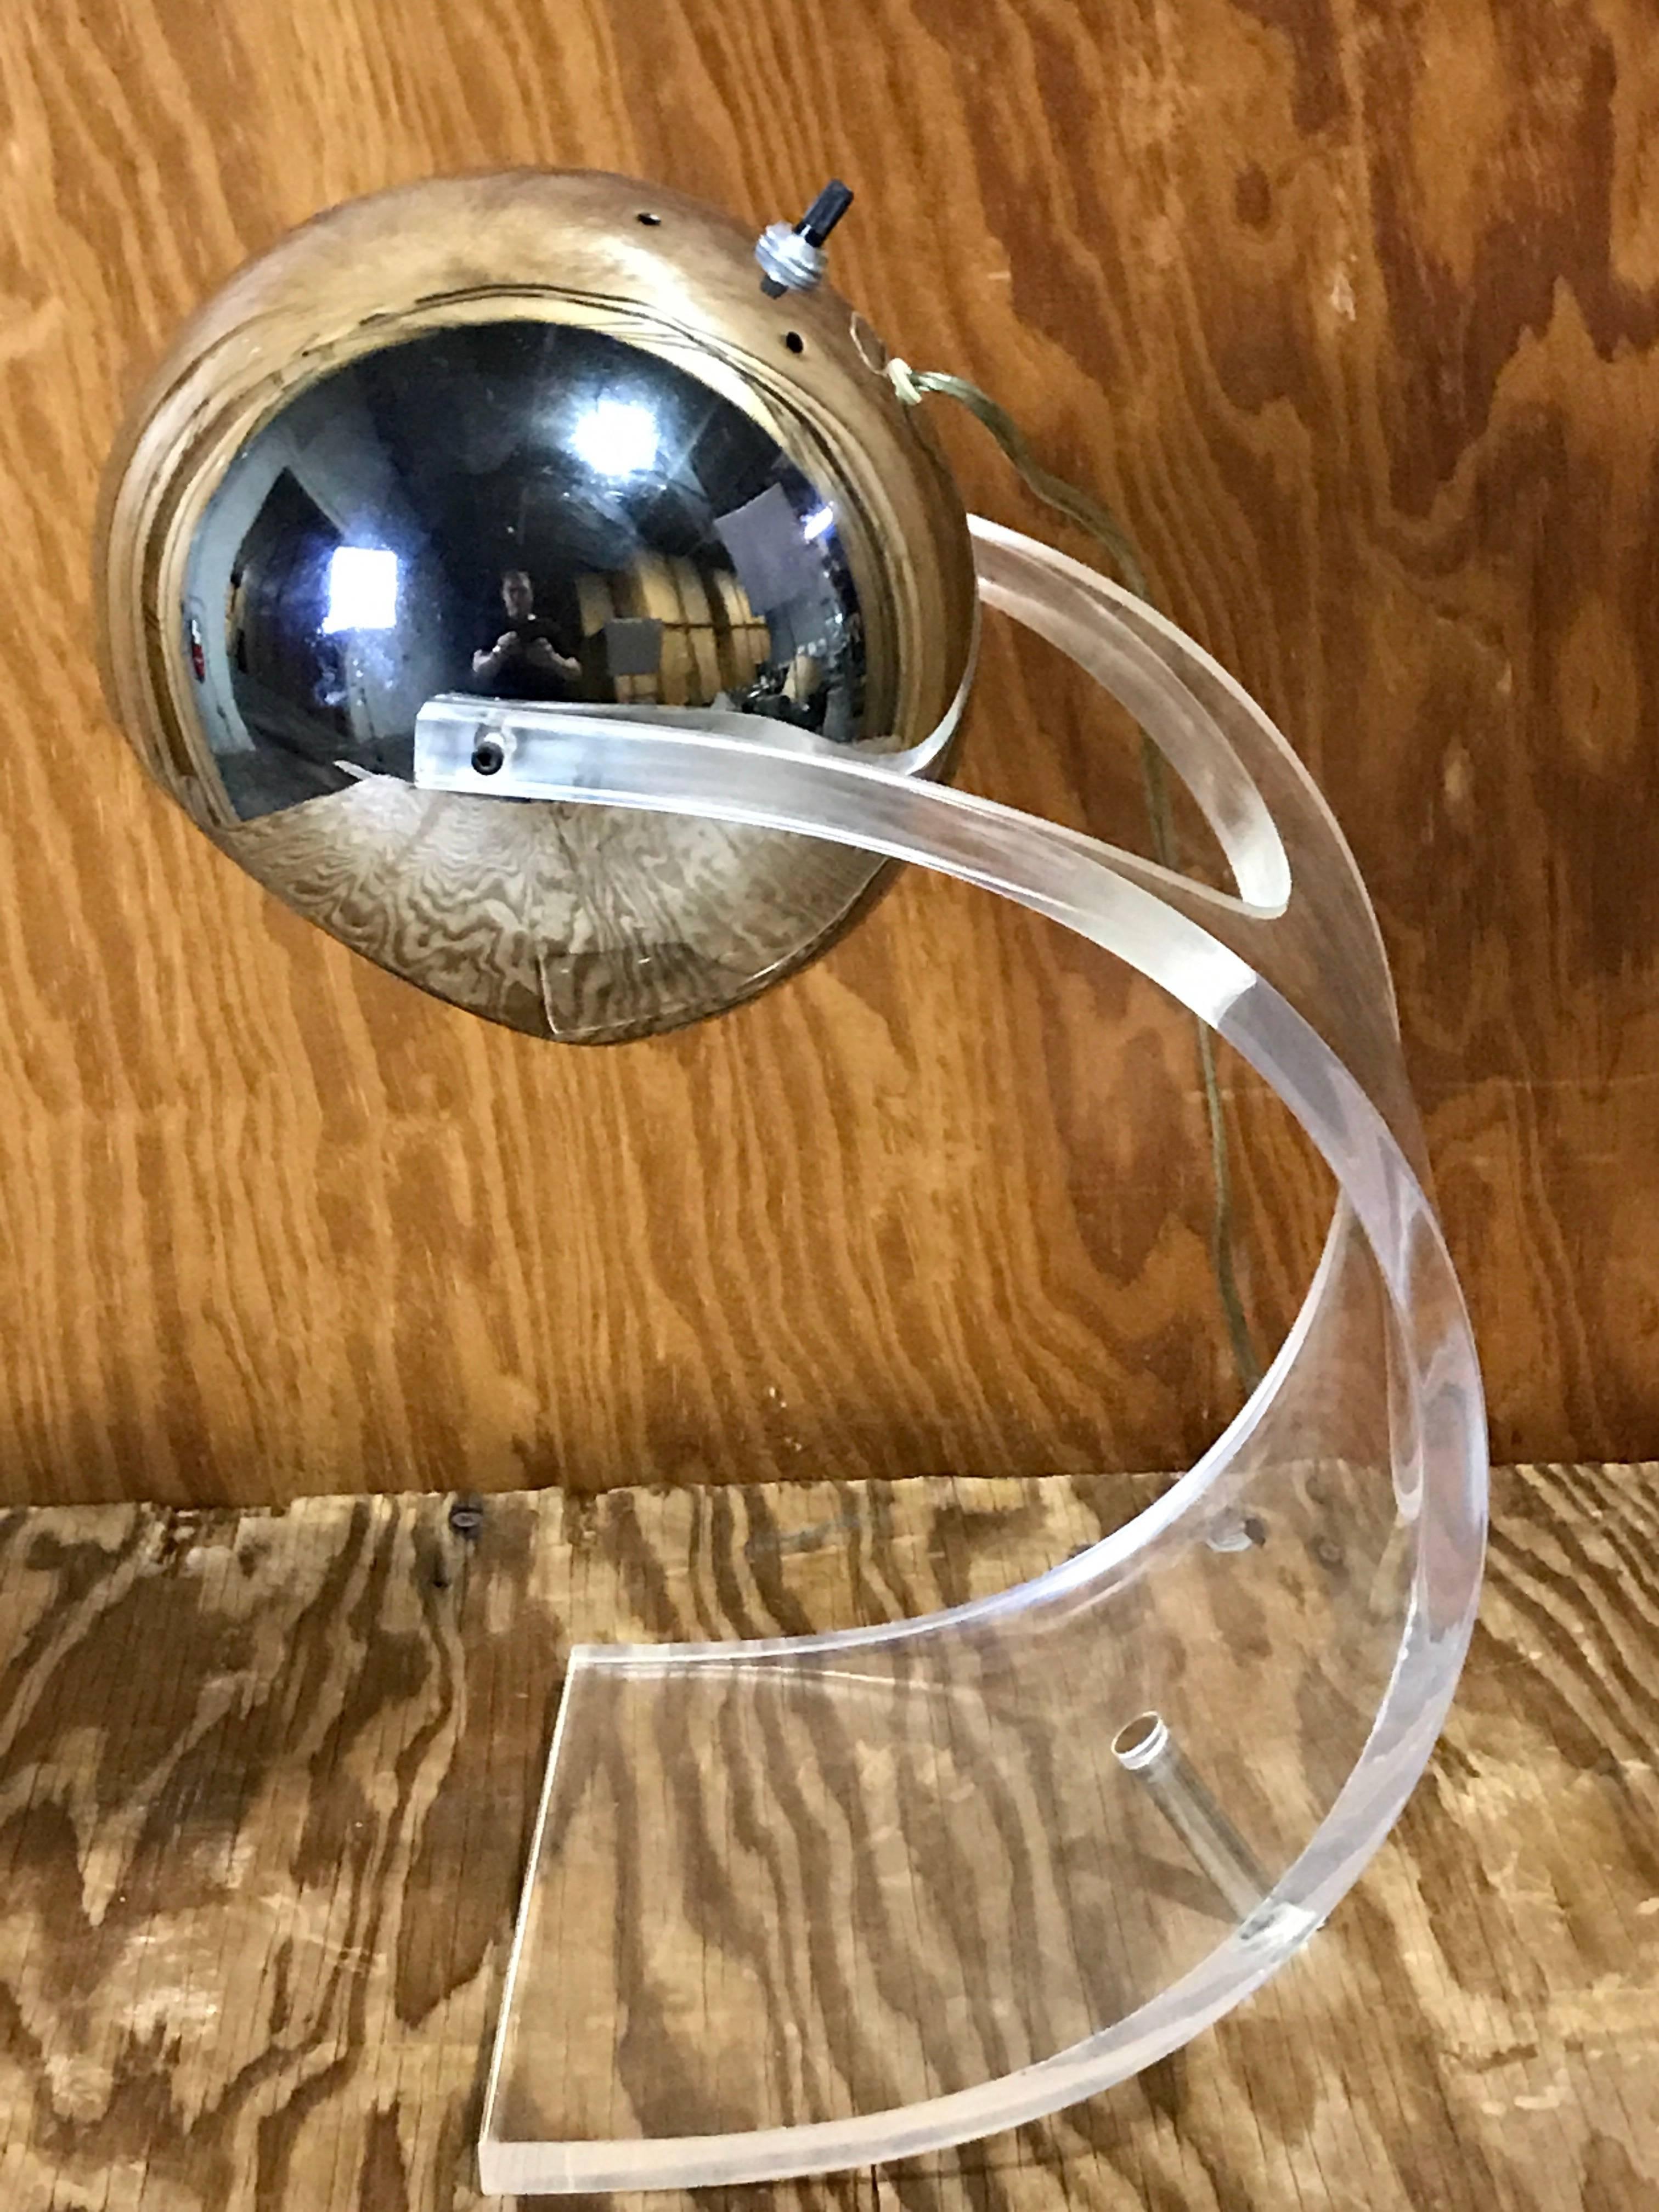 Mid-Century Lucite and chrome cantilever desk lamp, by Robert Sonneman, with bright 6" chrome ball supported with curved Lucite and chrome base.
This item is at our Atlanta GA, Location, not Palm Beach.
